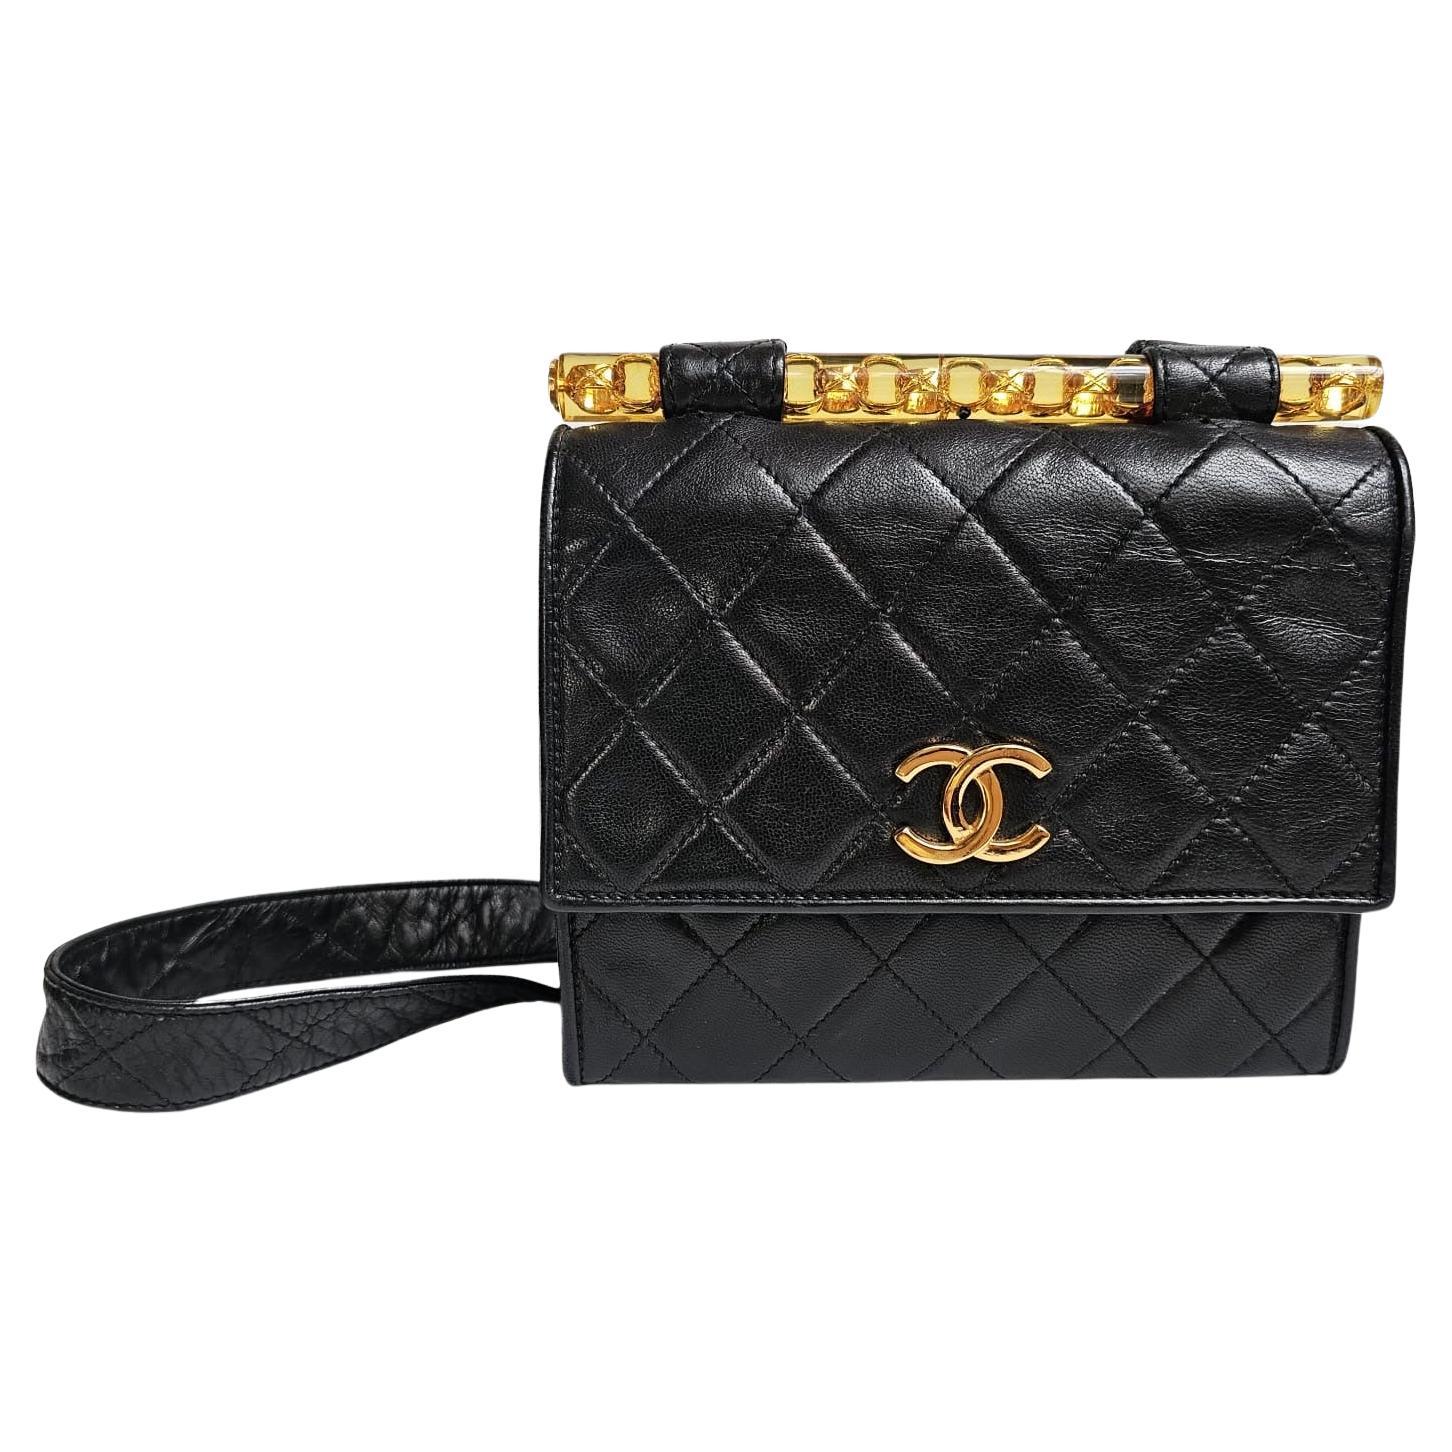 Do all Chanel bags have a logo?